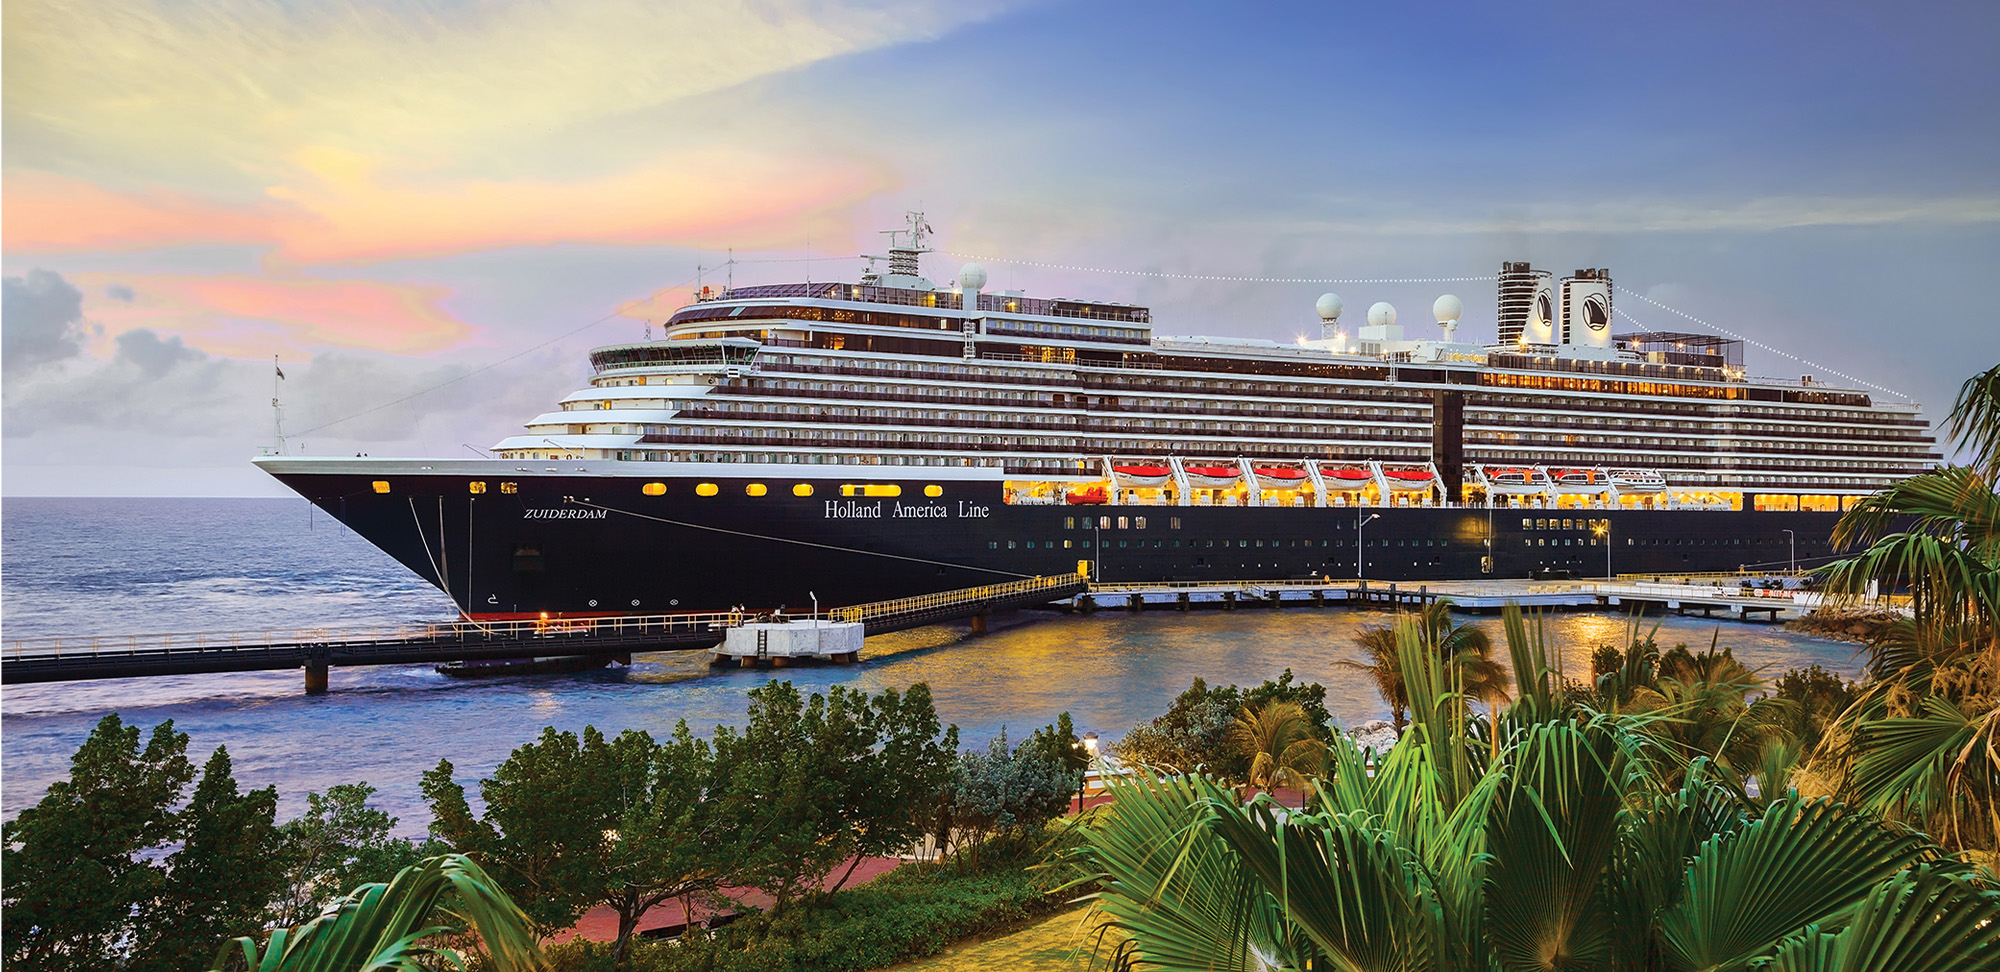 Cruise ship Zuiderdam, Holland America Line, docked at port Willemstad at sunset.